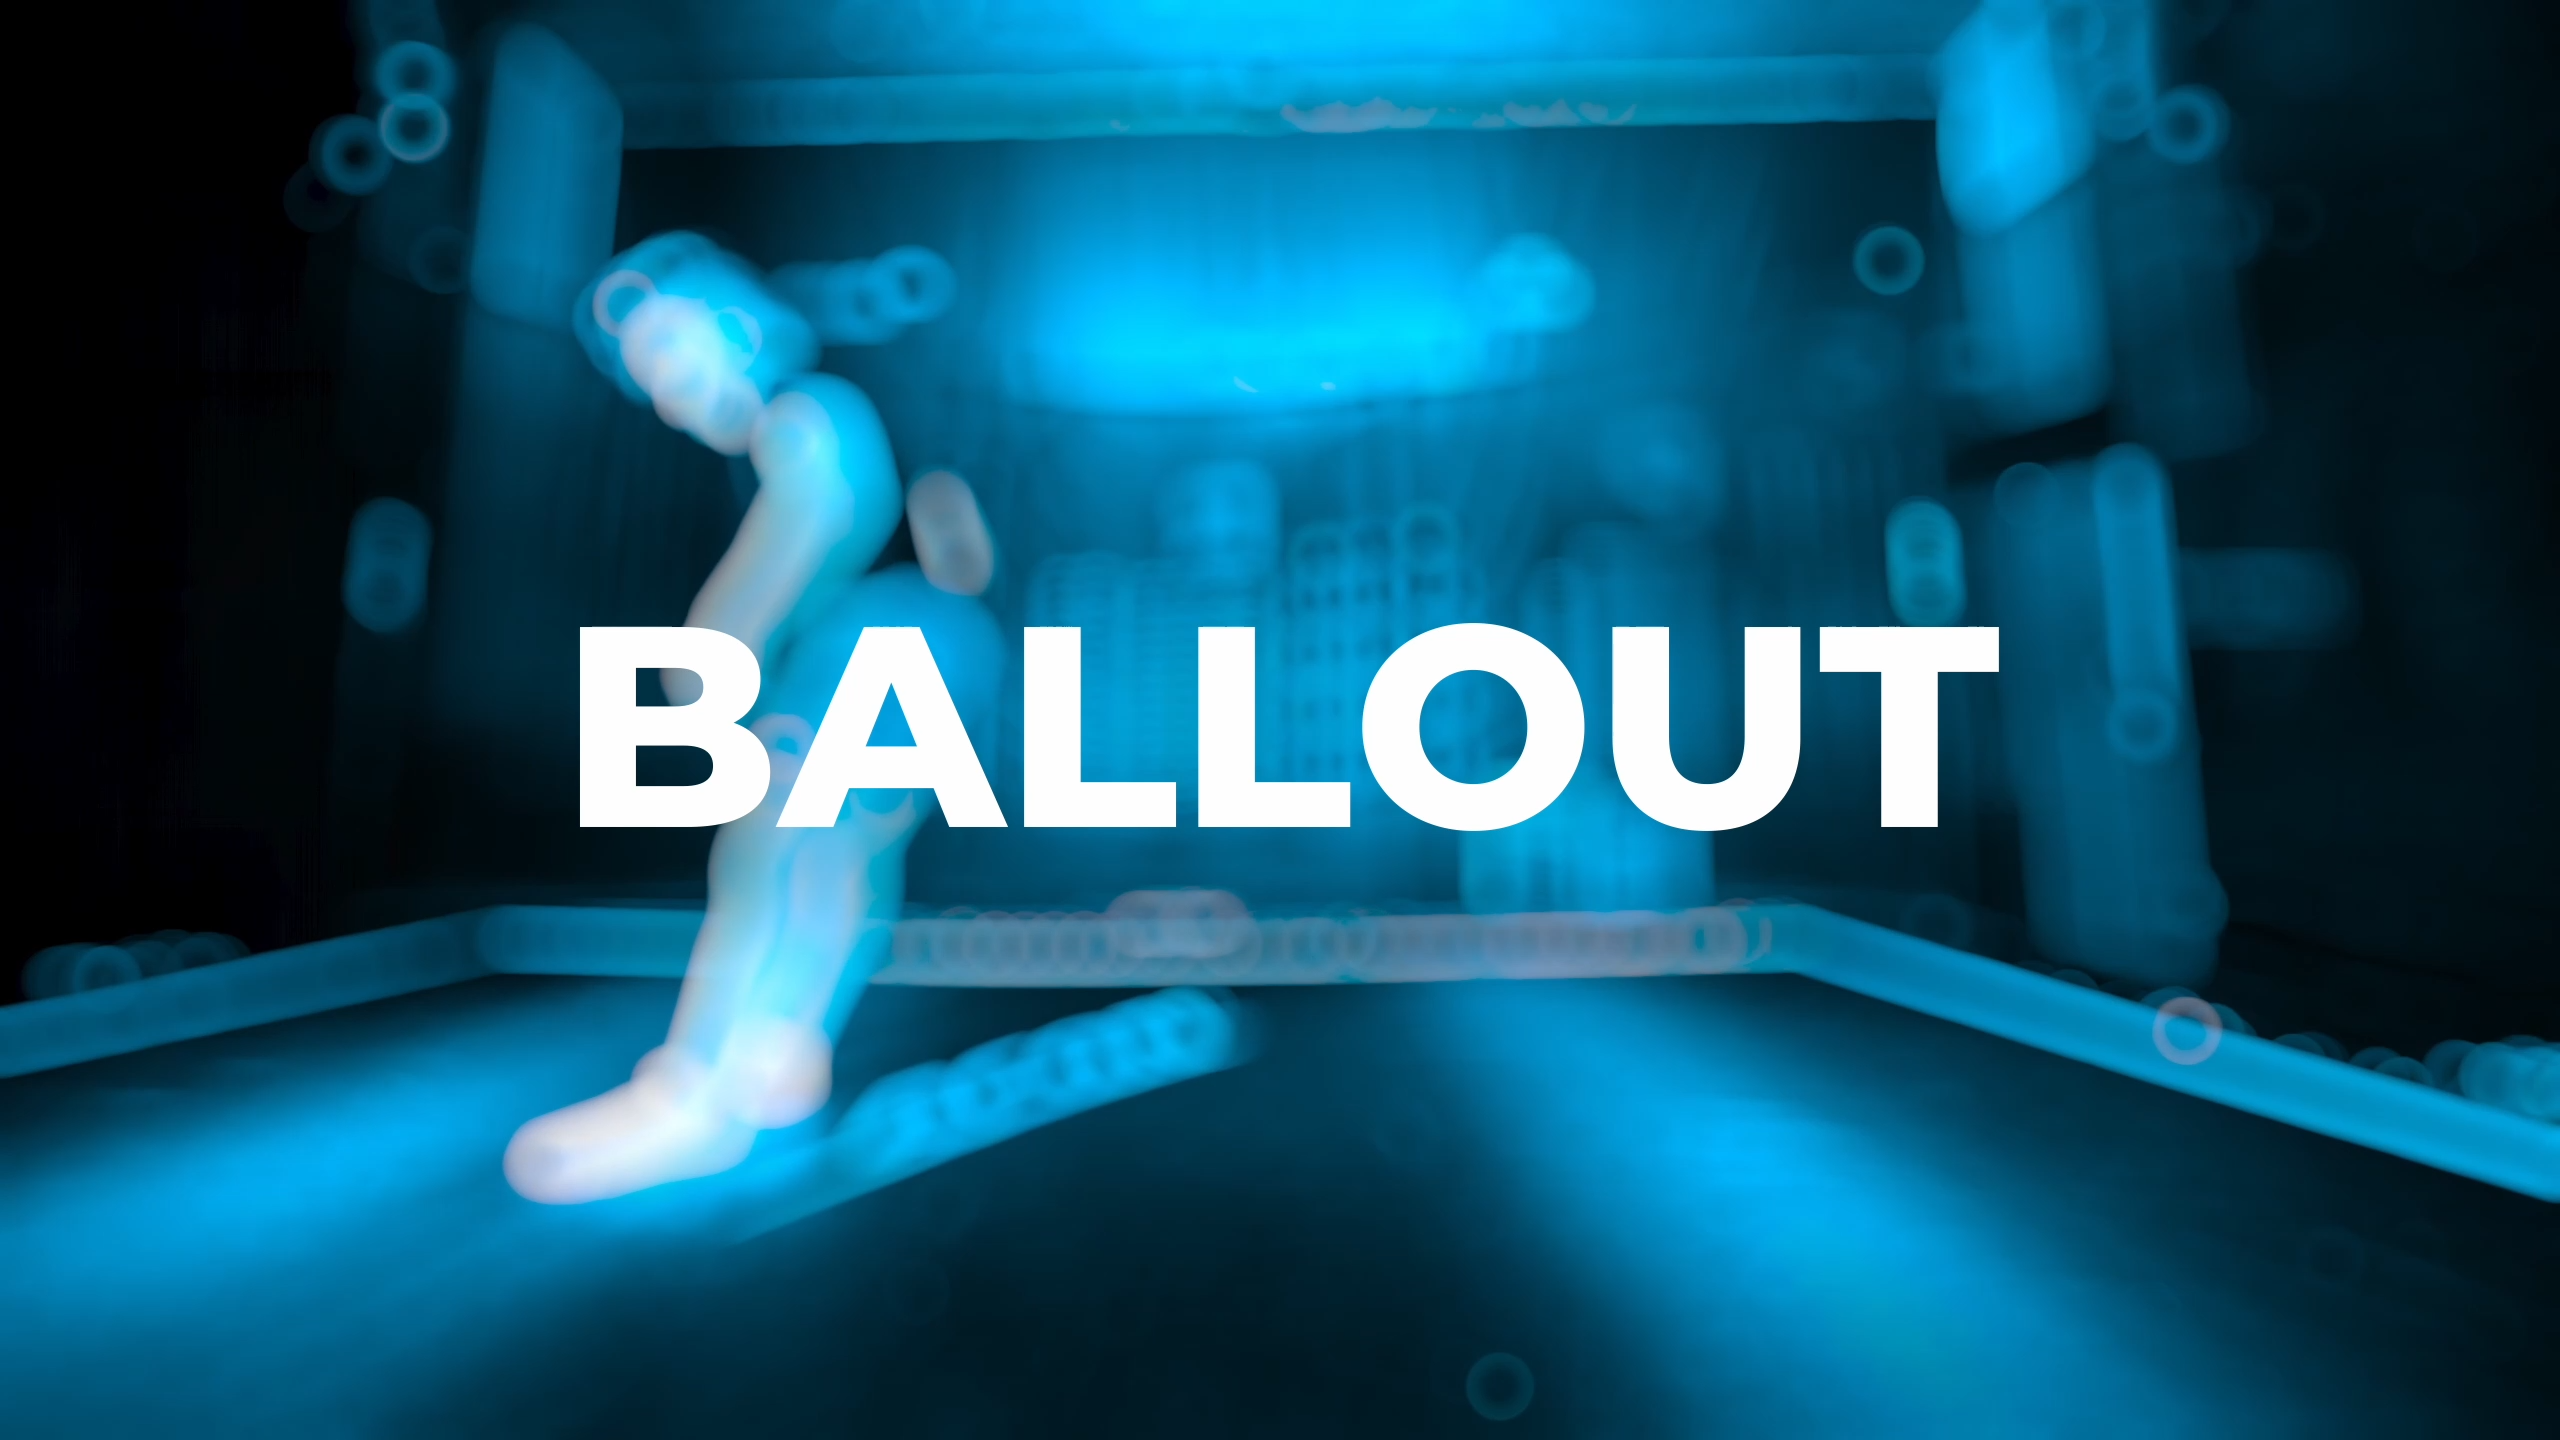 Ballout tutorial - placeholder image